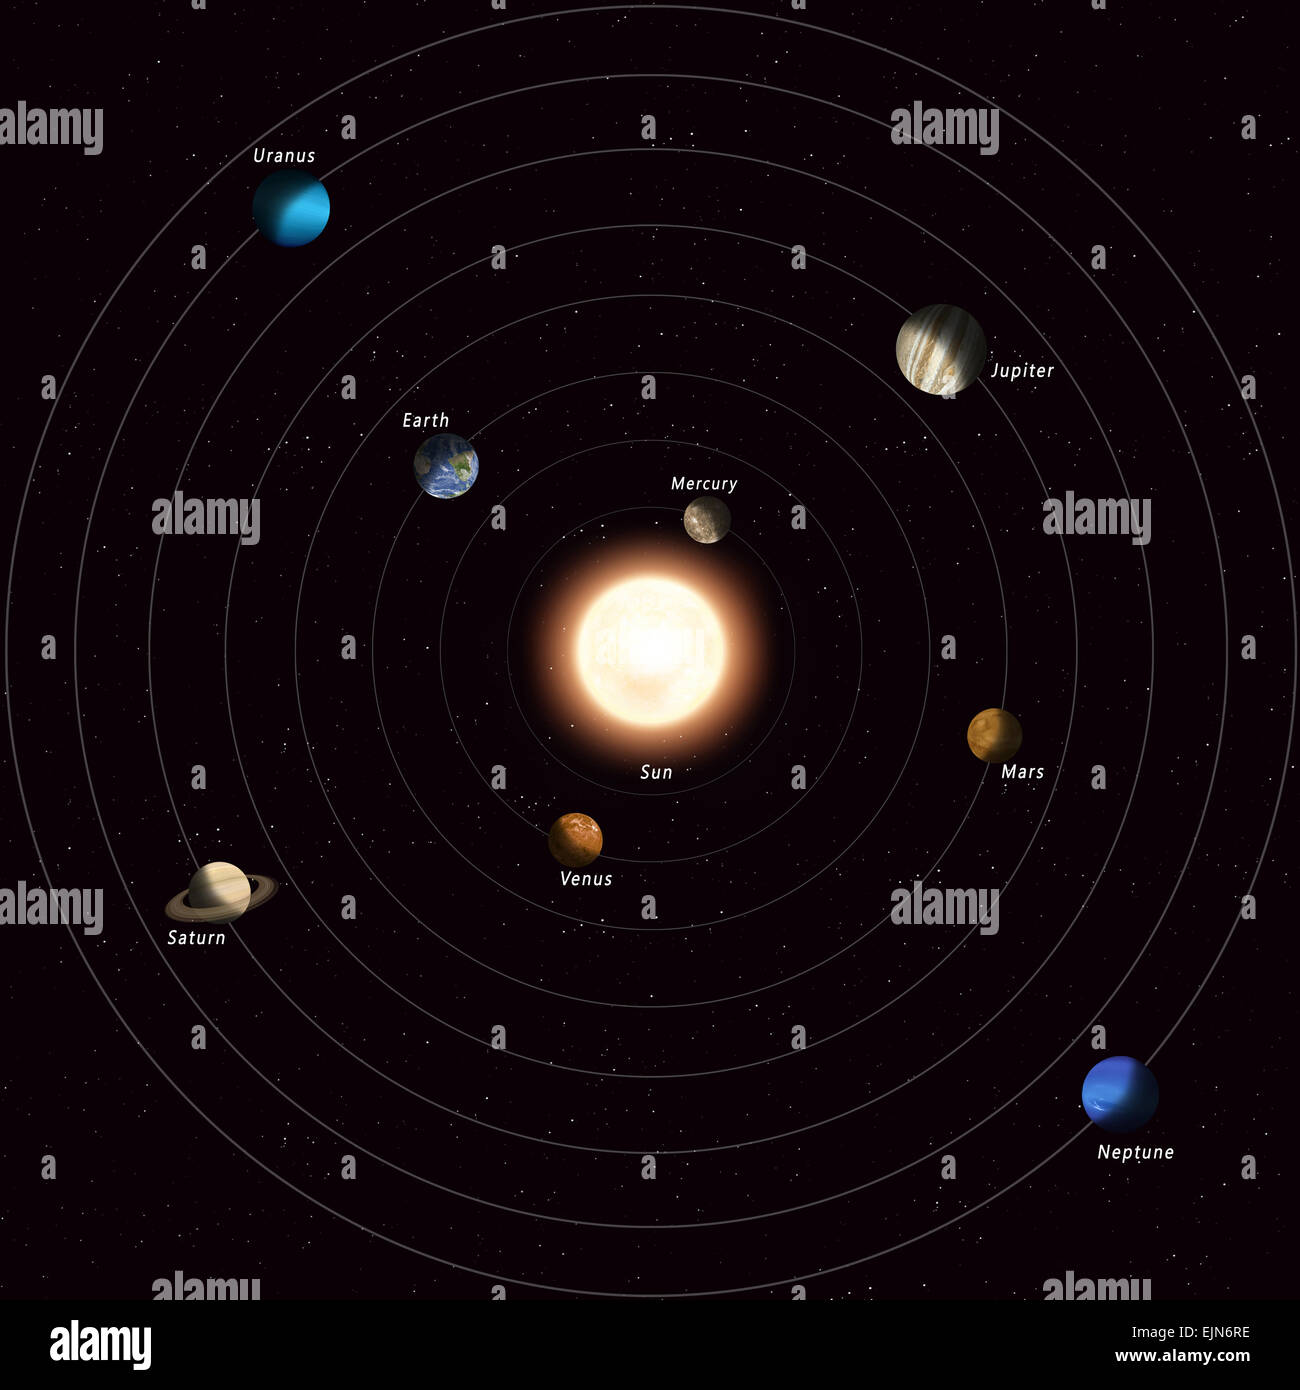 All about solar system pdf